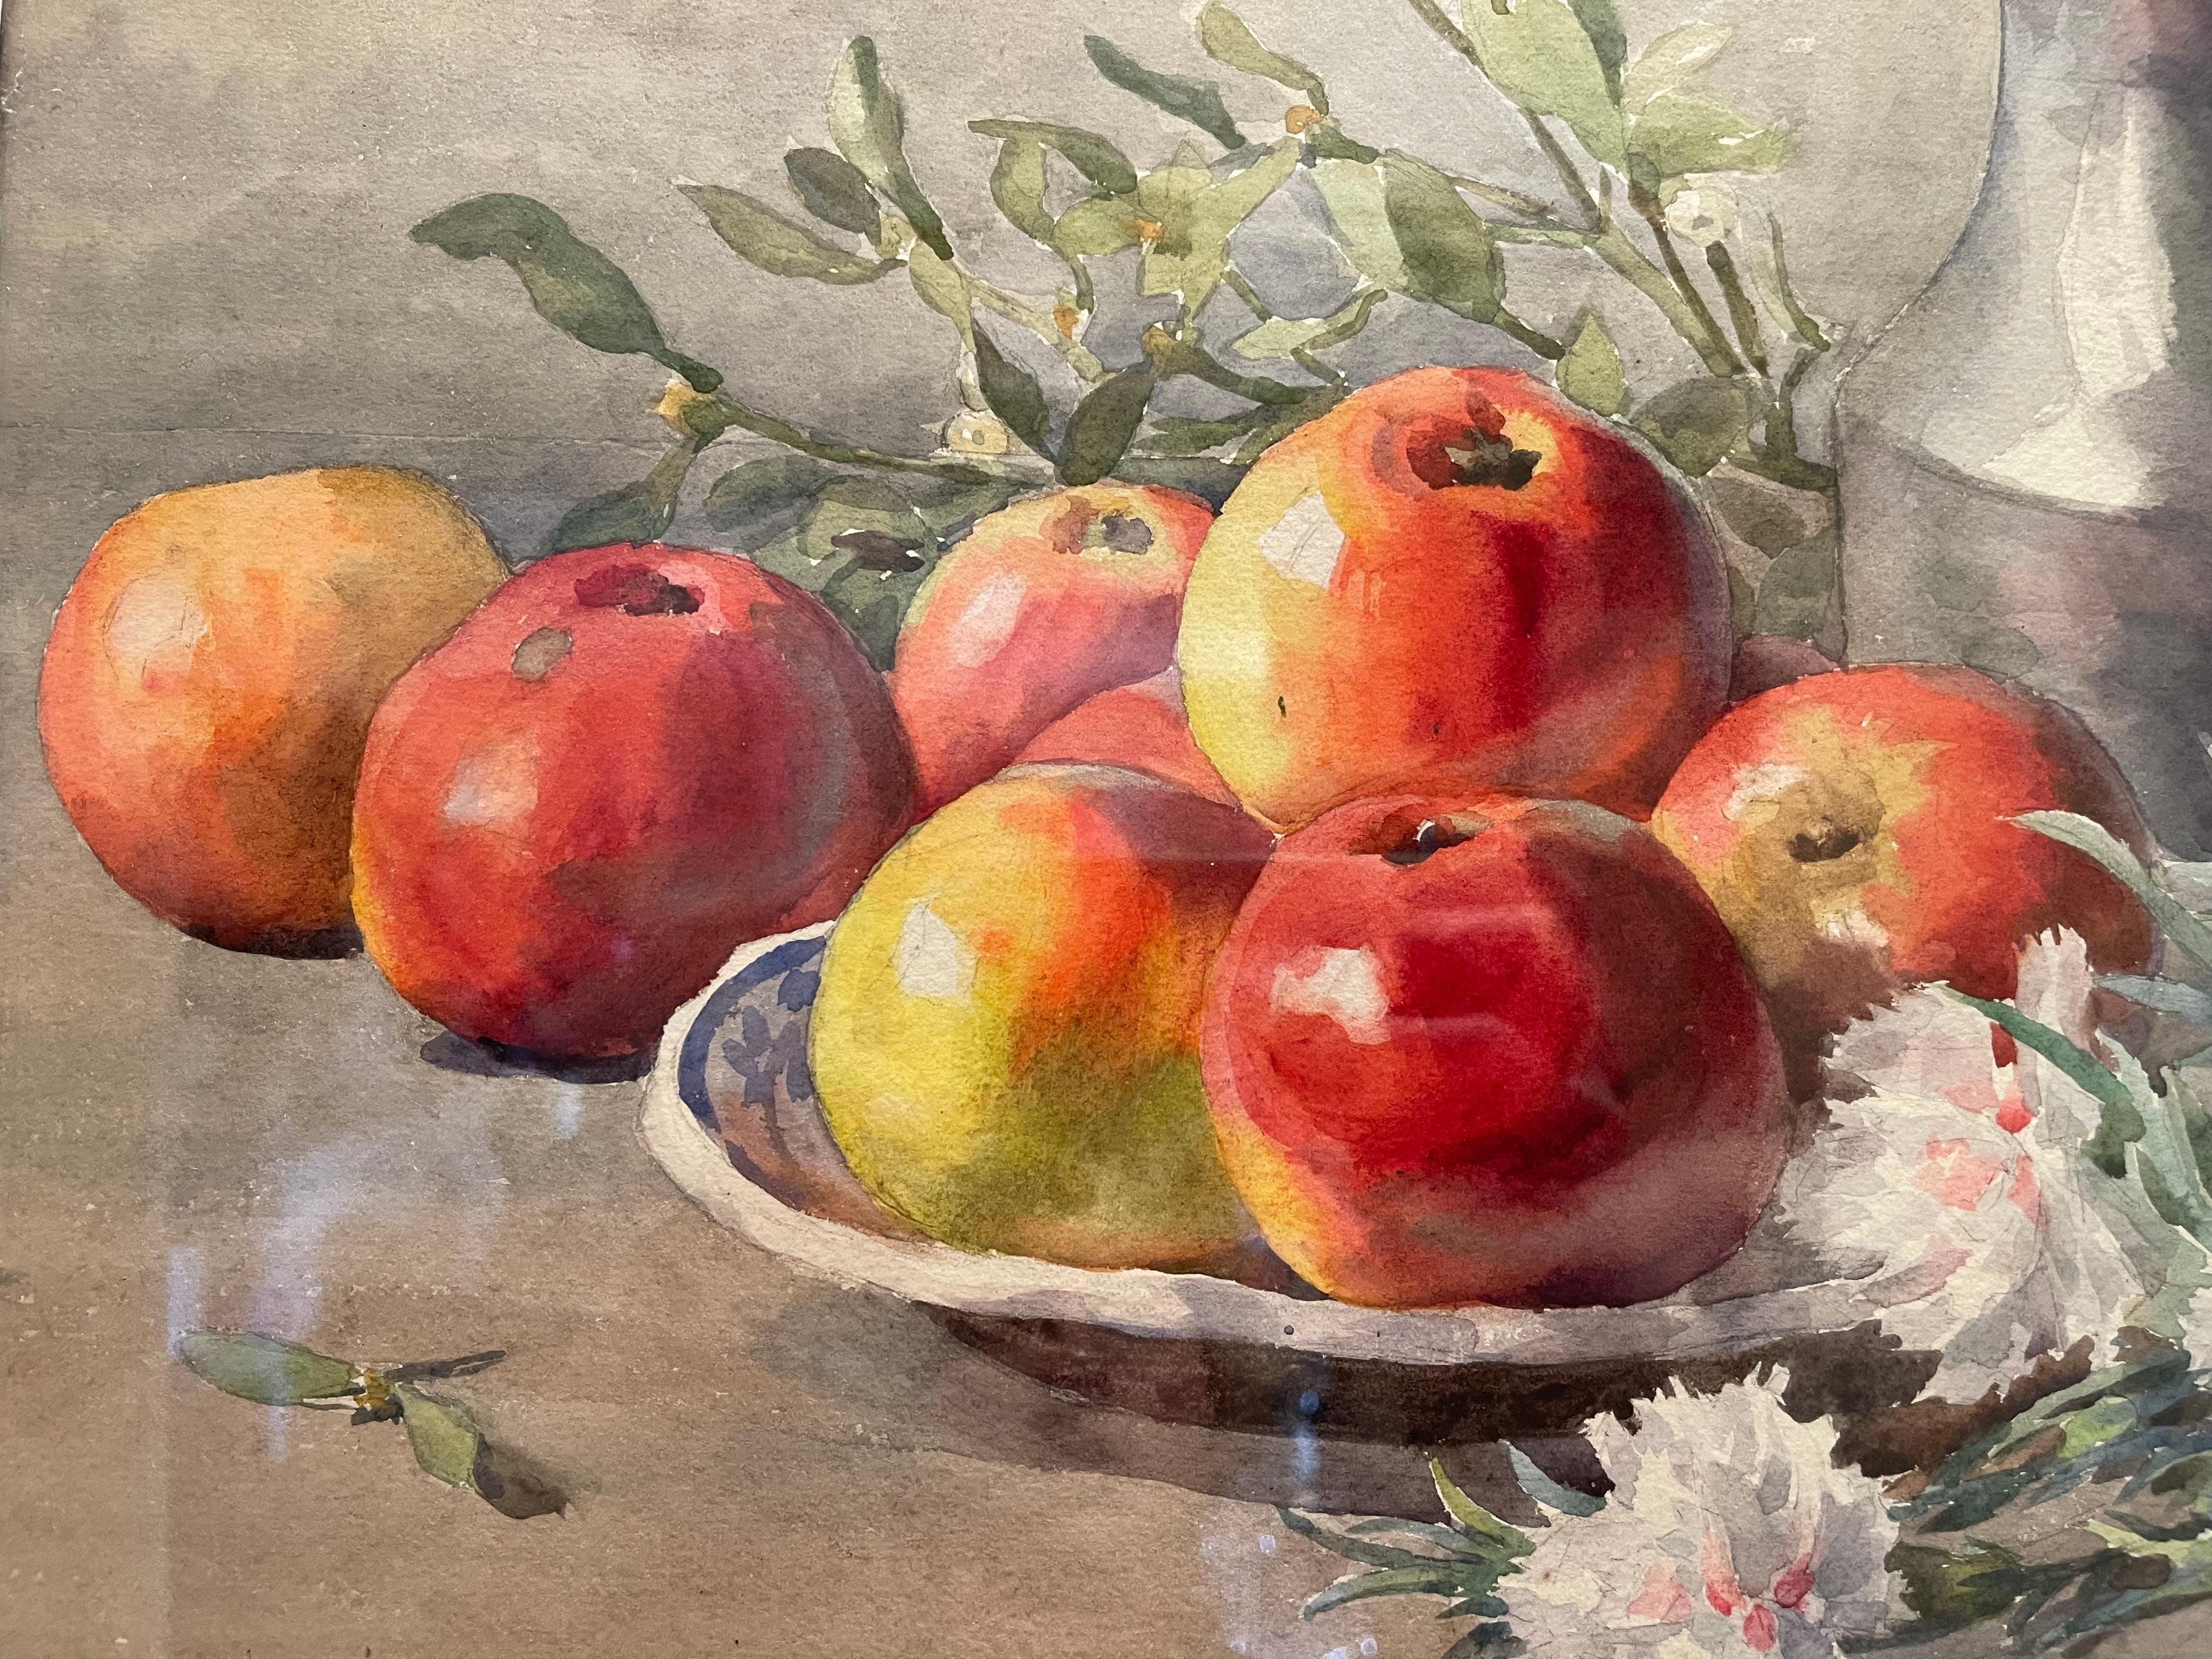 Painting, oil on cardboard, representing a still life on the theme of apples and carnations with a pewter carafe. Painting presented under glass, in very good condition and signed lower right 